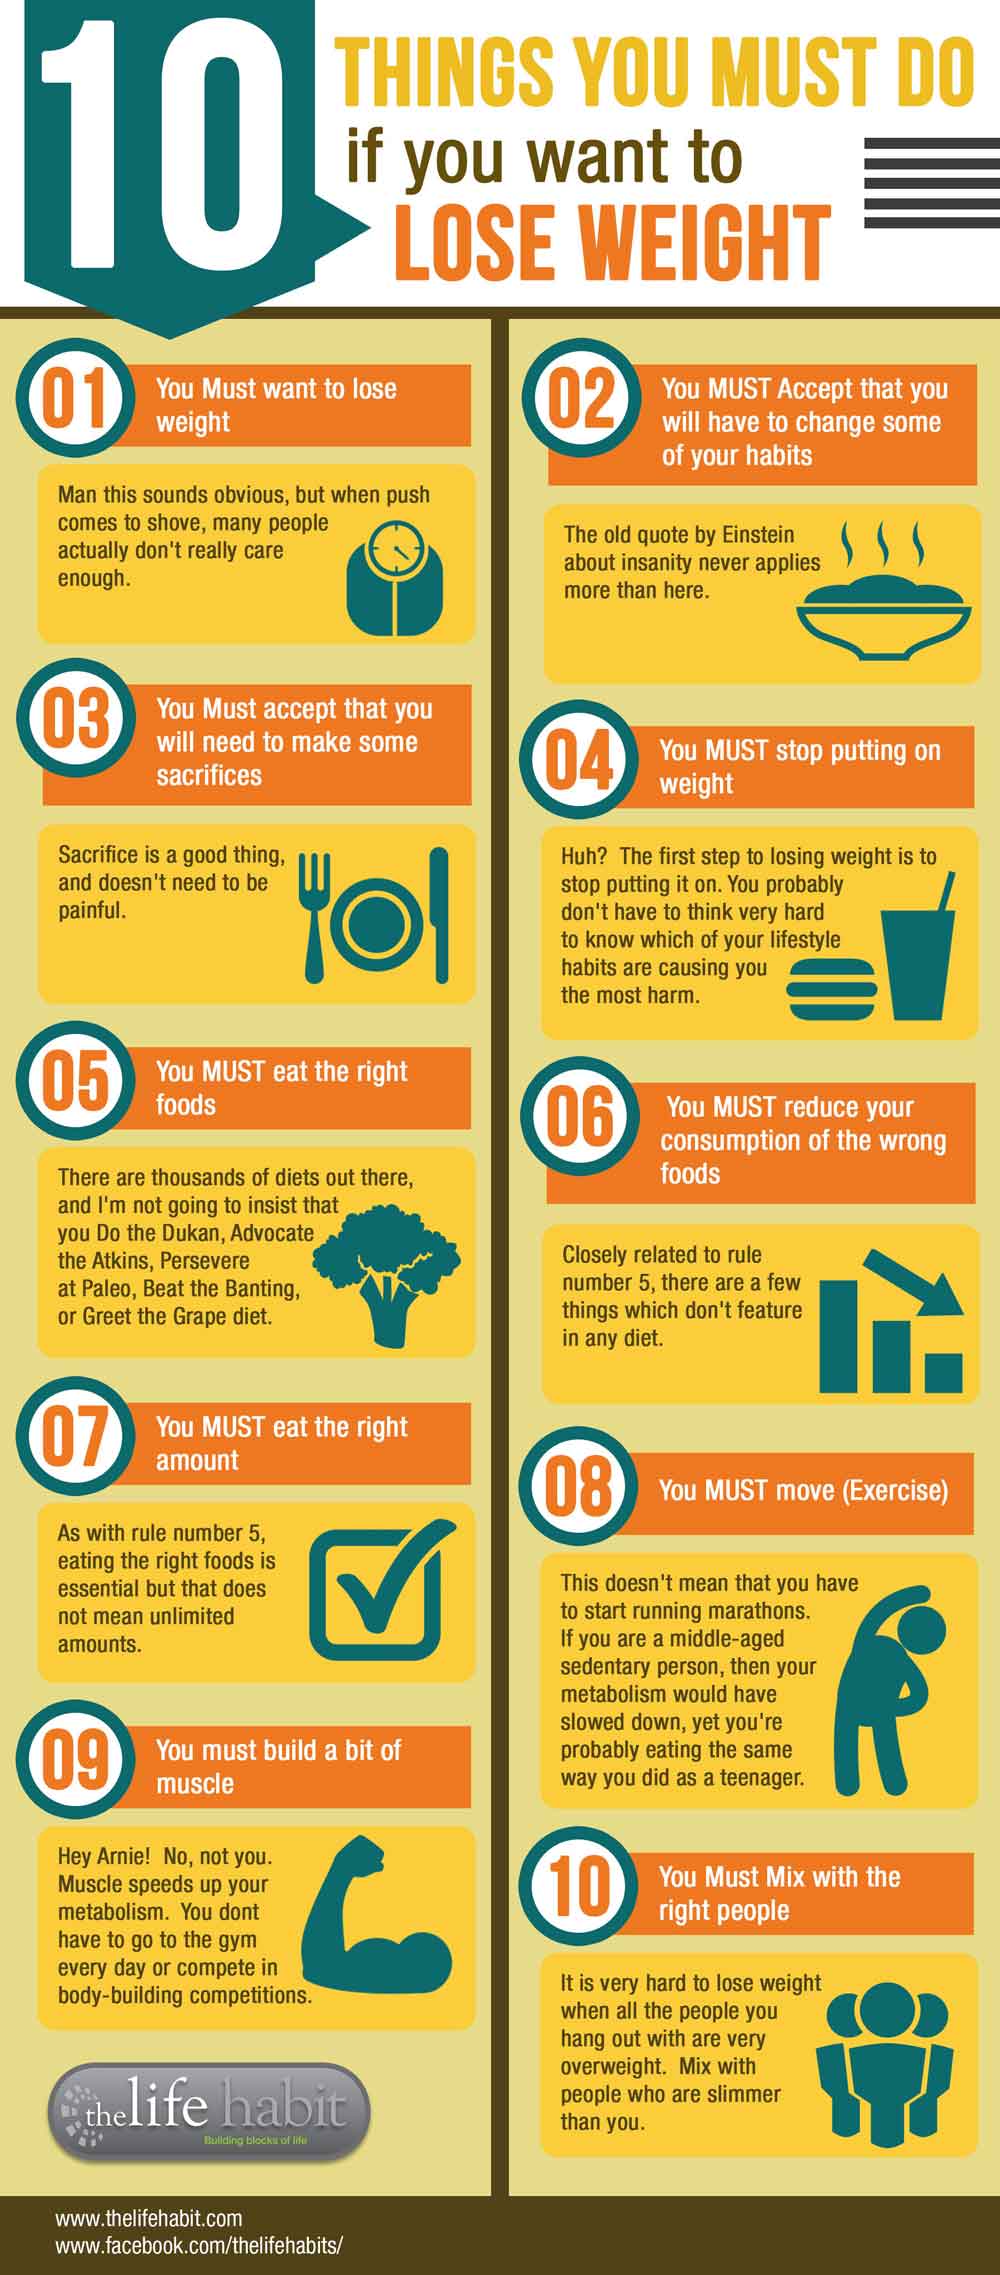 10 things you must do if you want to lose weight - infographic